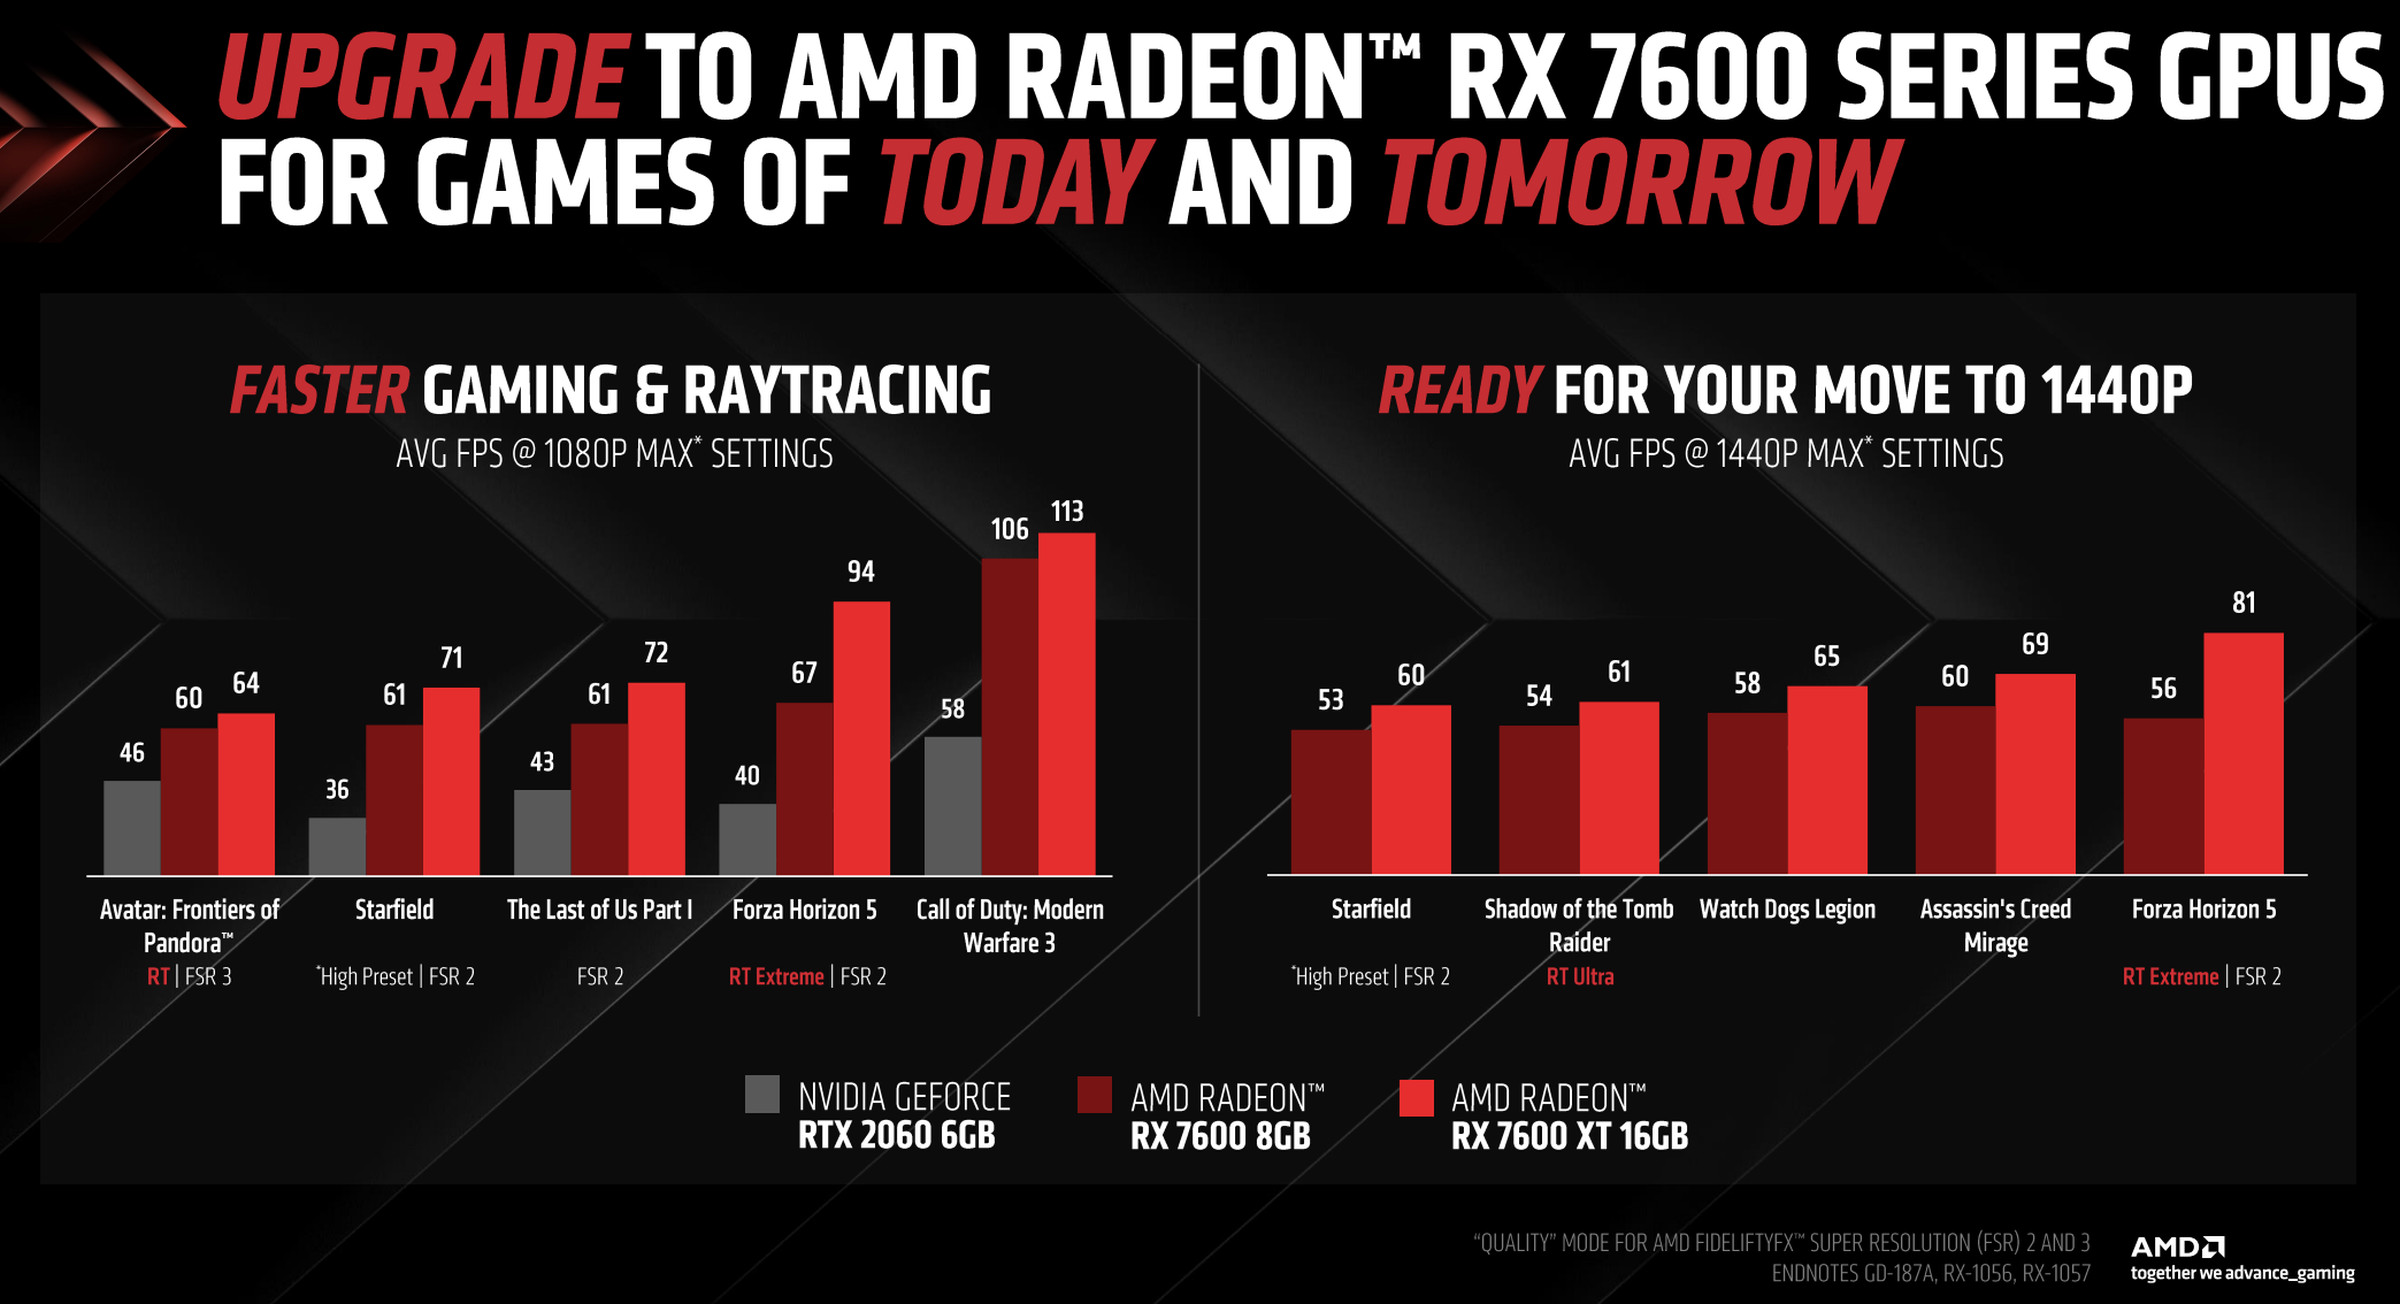 AMD is promising 1440p gaming on the RX 7600 XT.